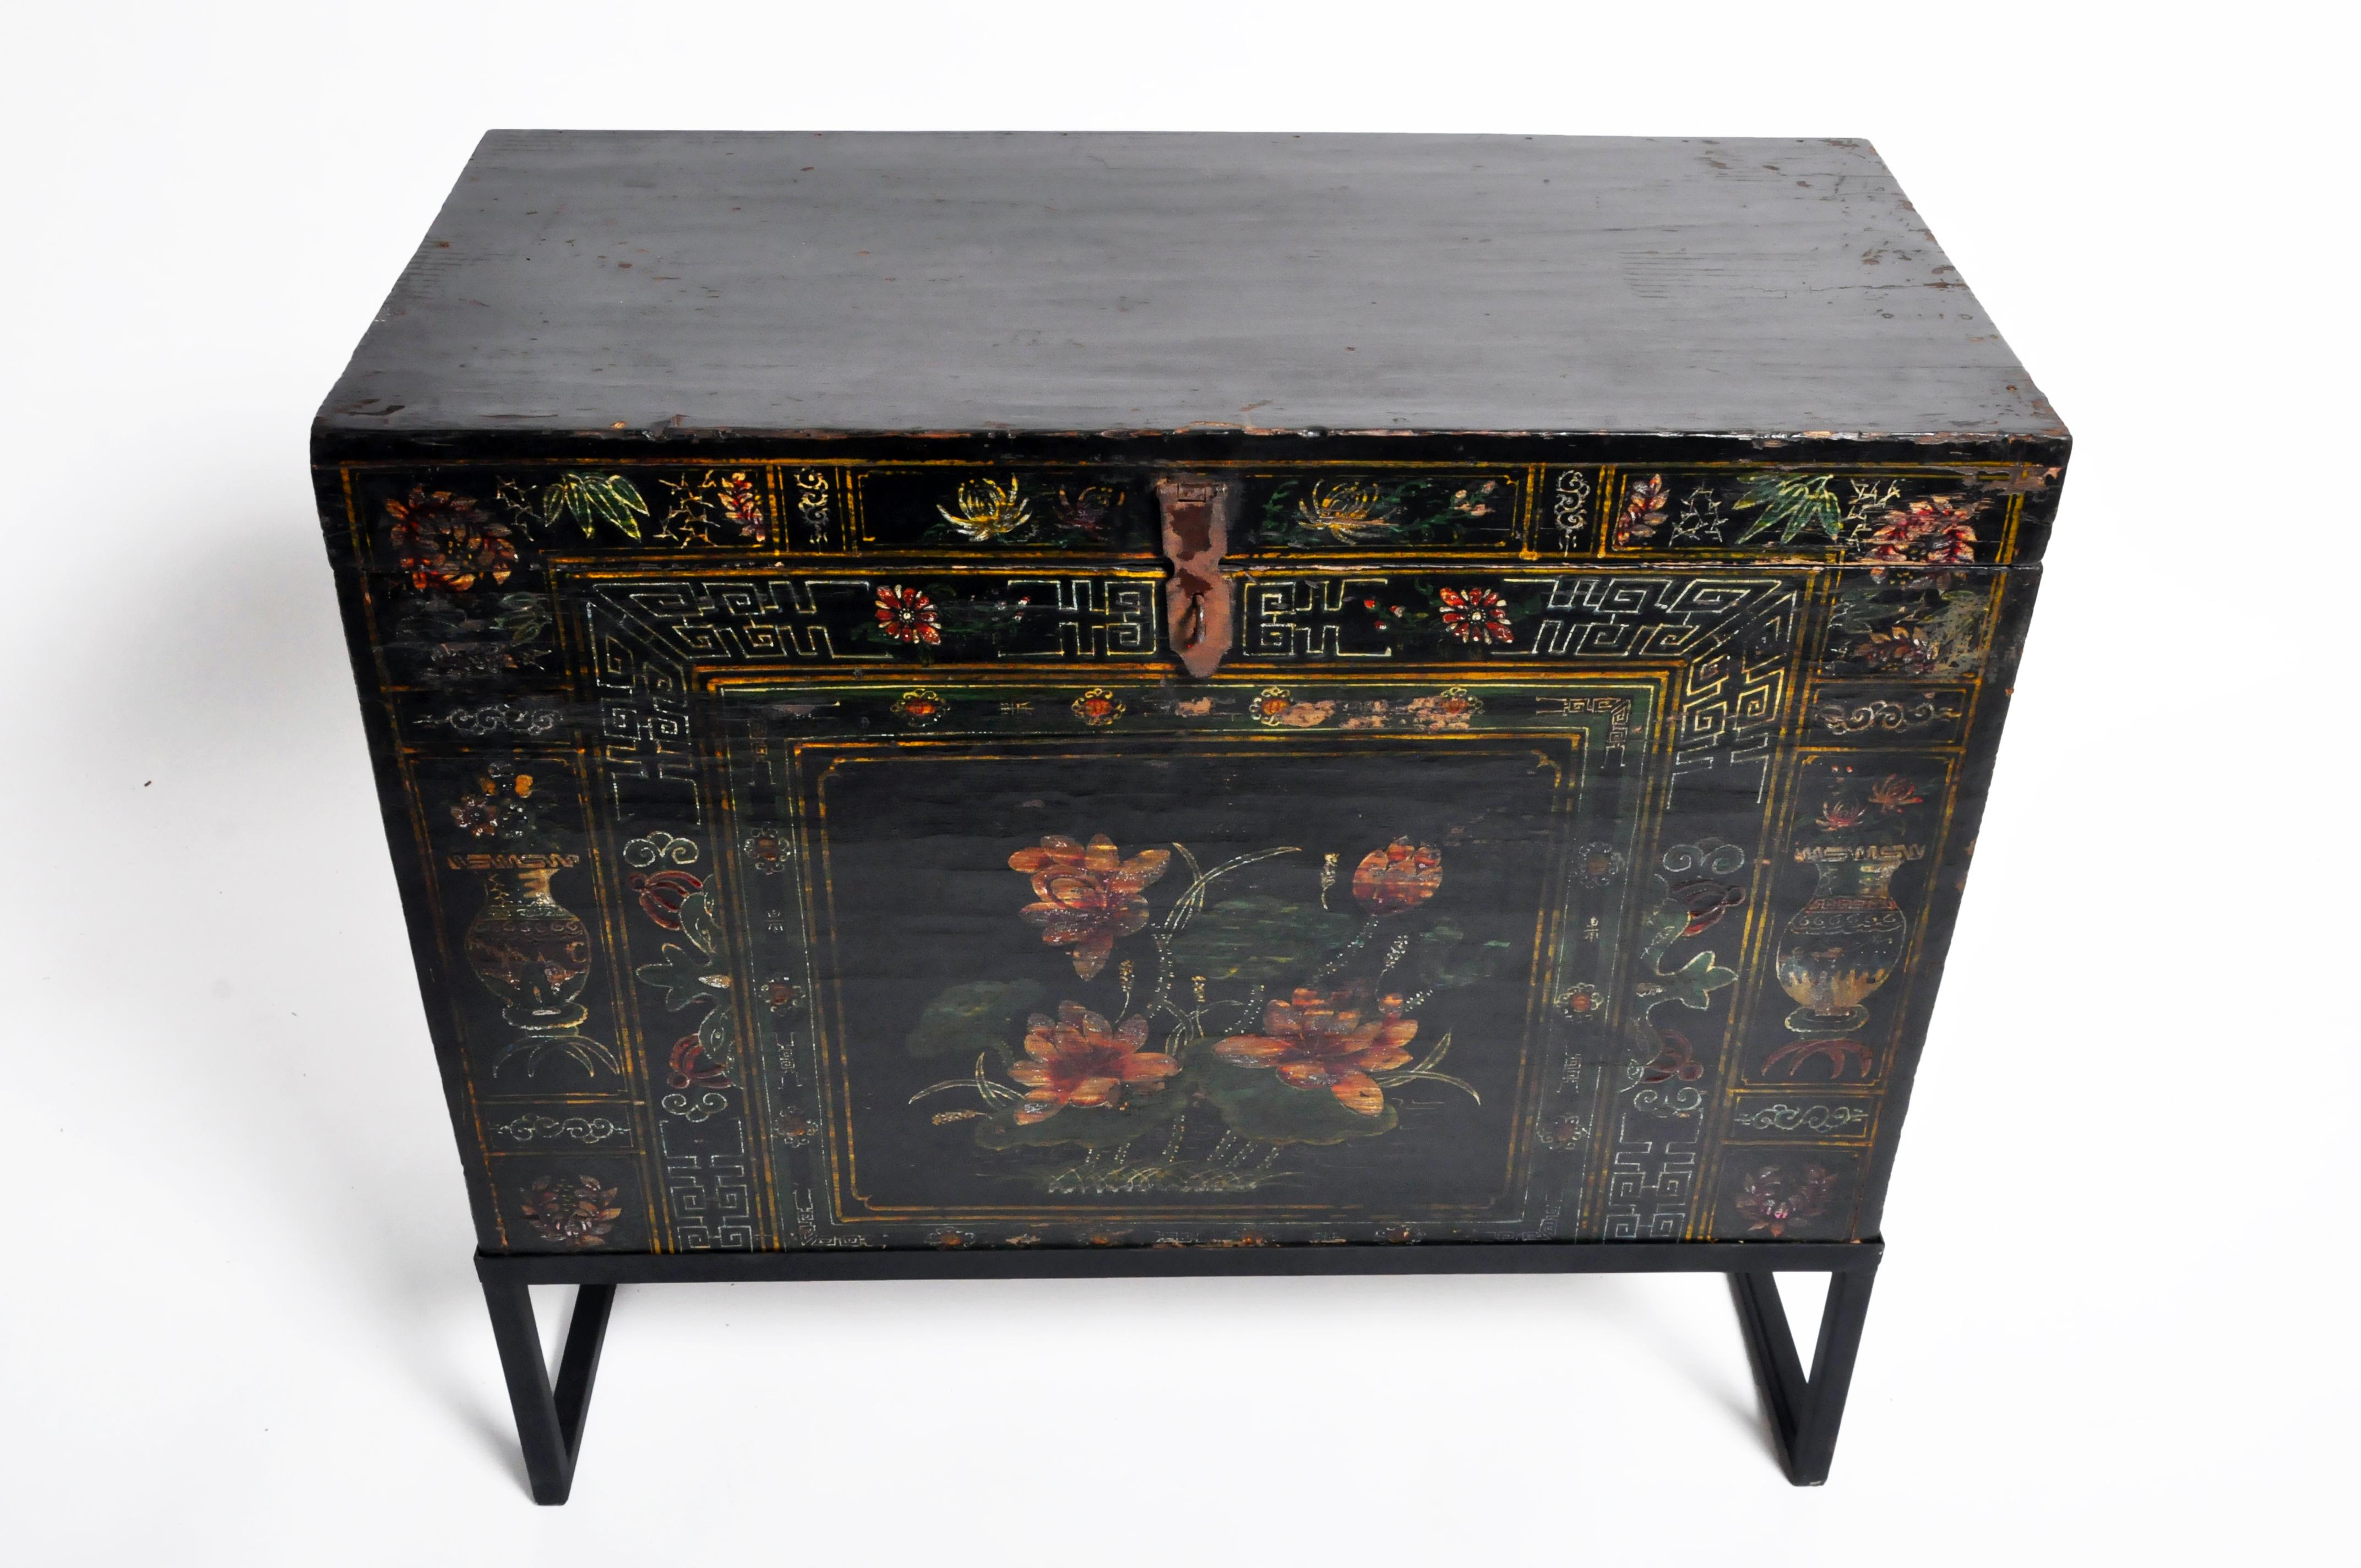 Late Qing Dynasty Storage Chest with Painting and Metal Base 2